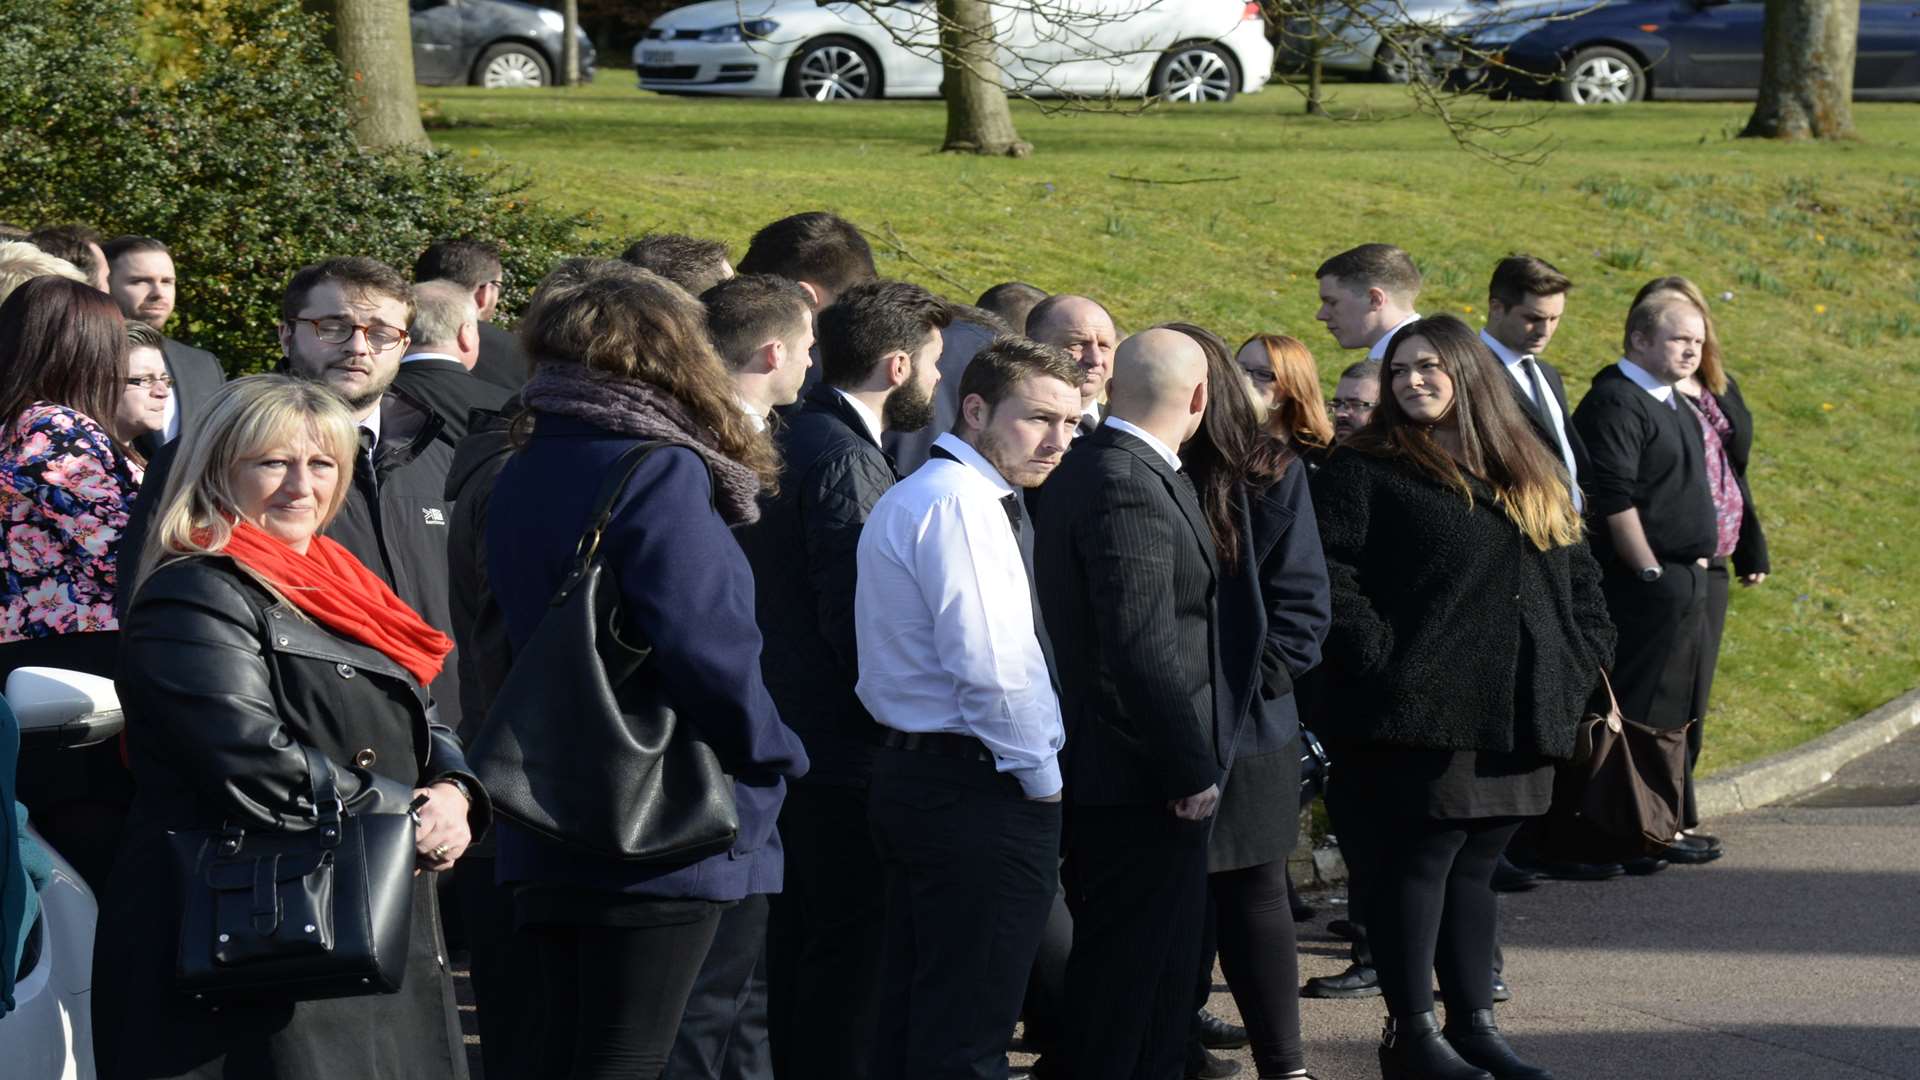 Mourners gather for the funeral of Pat Lamb